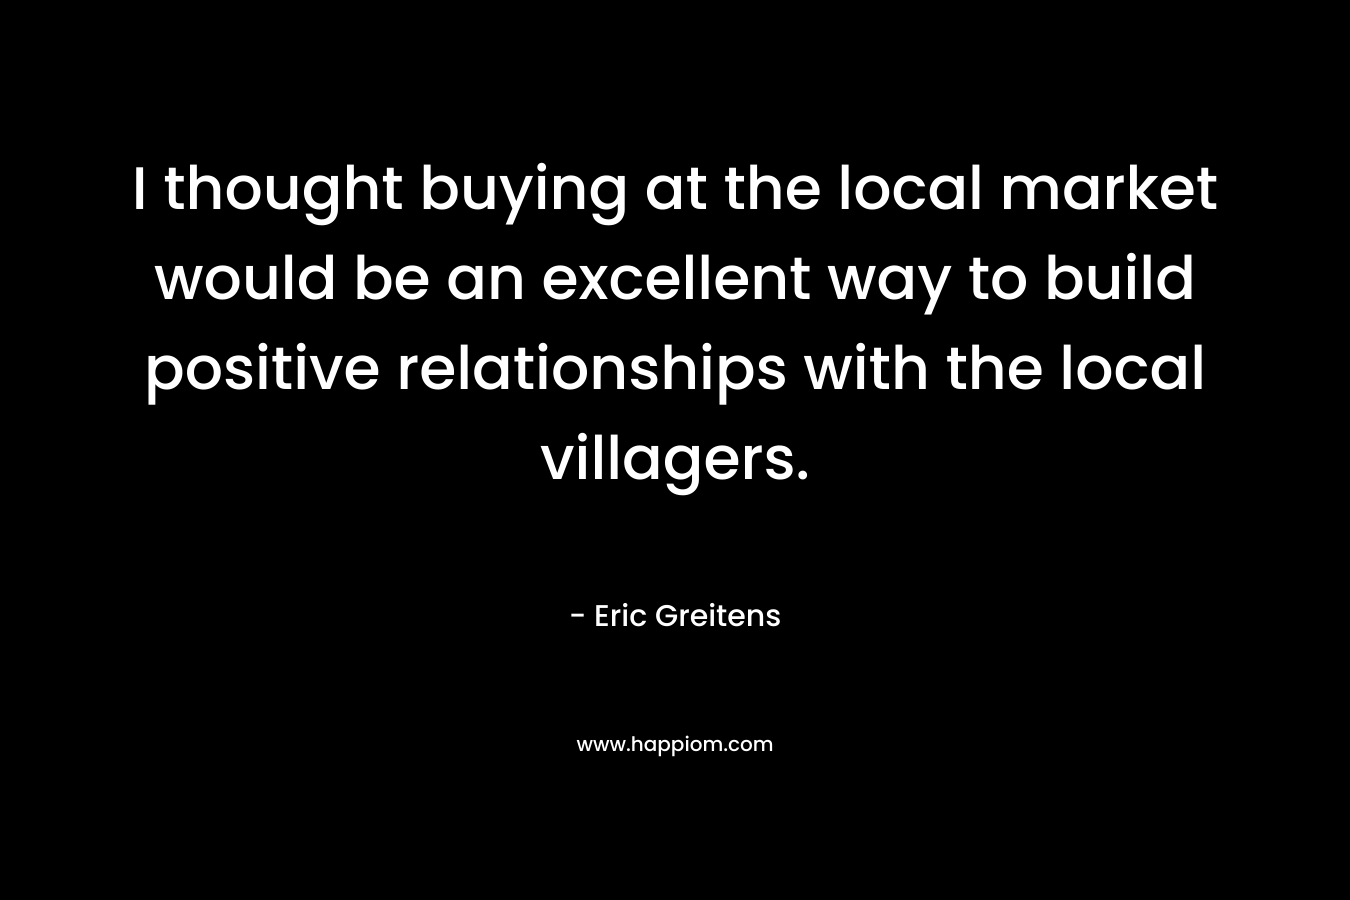 I thought buying at the local market would be an excellent way to build positive relationships with the local villagers. – Eric Greitens